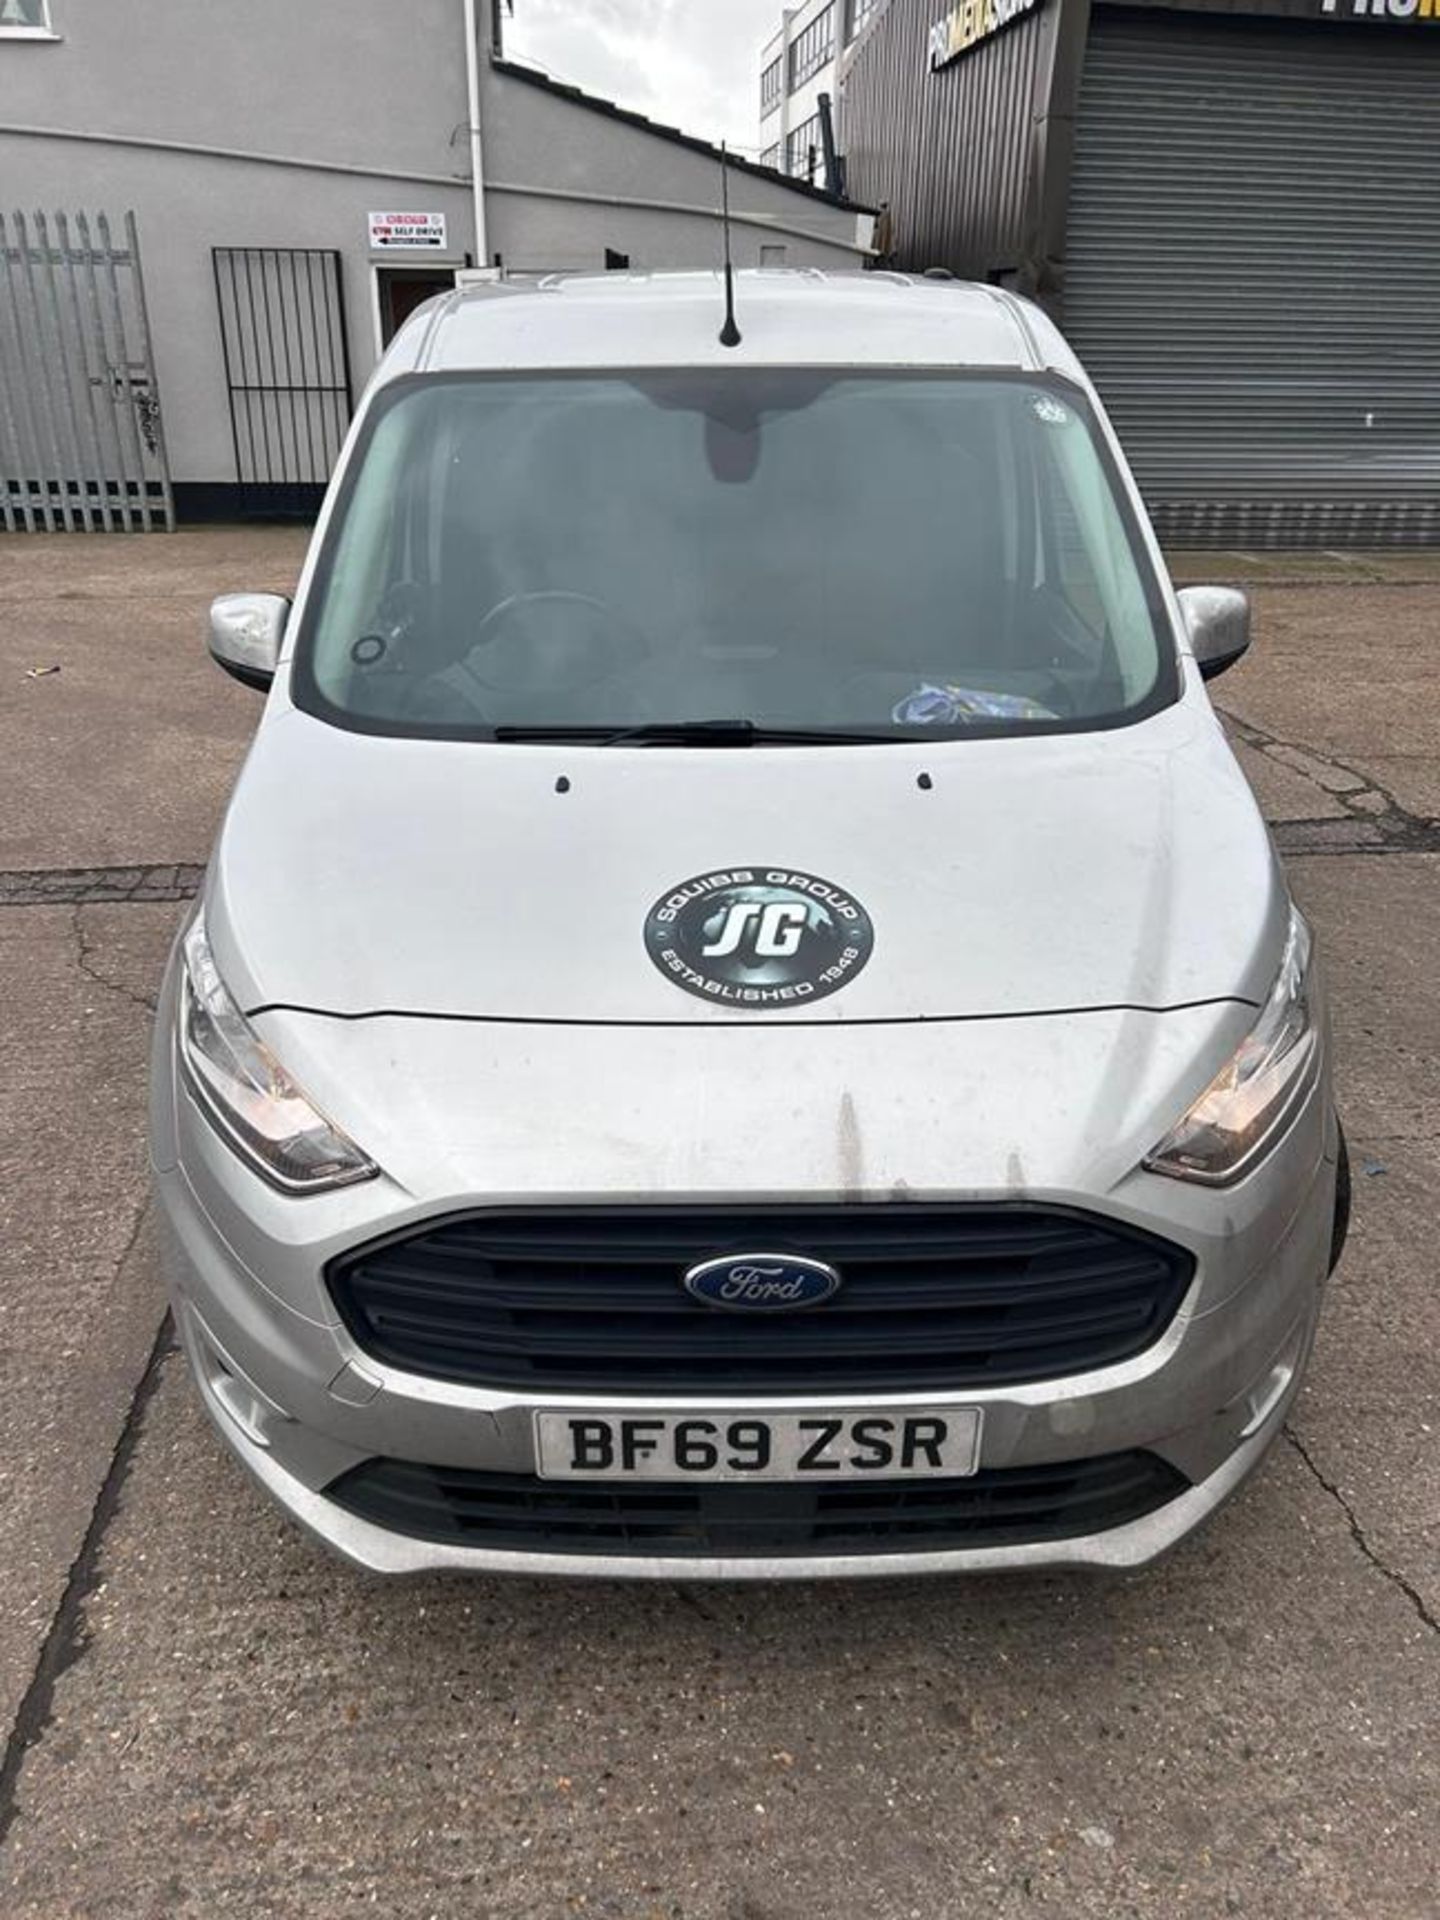 Ford Transit Connect 200 L1 Diesel Panel Van (BF69 ZSR), Odometer Reads: 77,814 Miles, Date of First - Bild 3 aus 16